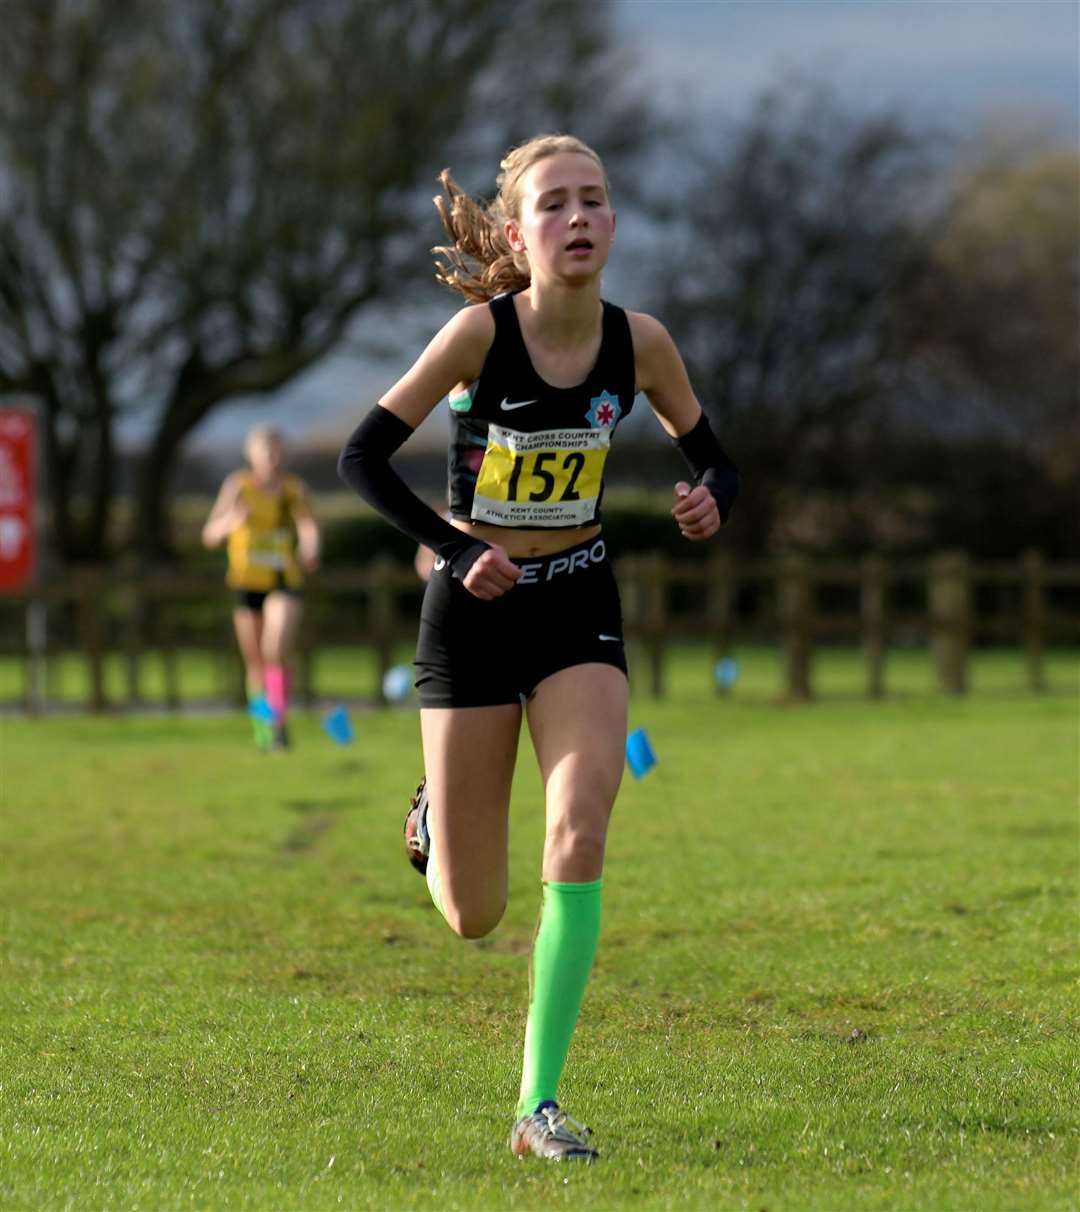 Second place in the under-15 girls’ race went to Aoife McDonagh of Blackheath & Bromley. Picture: Barry Goodwin